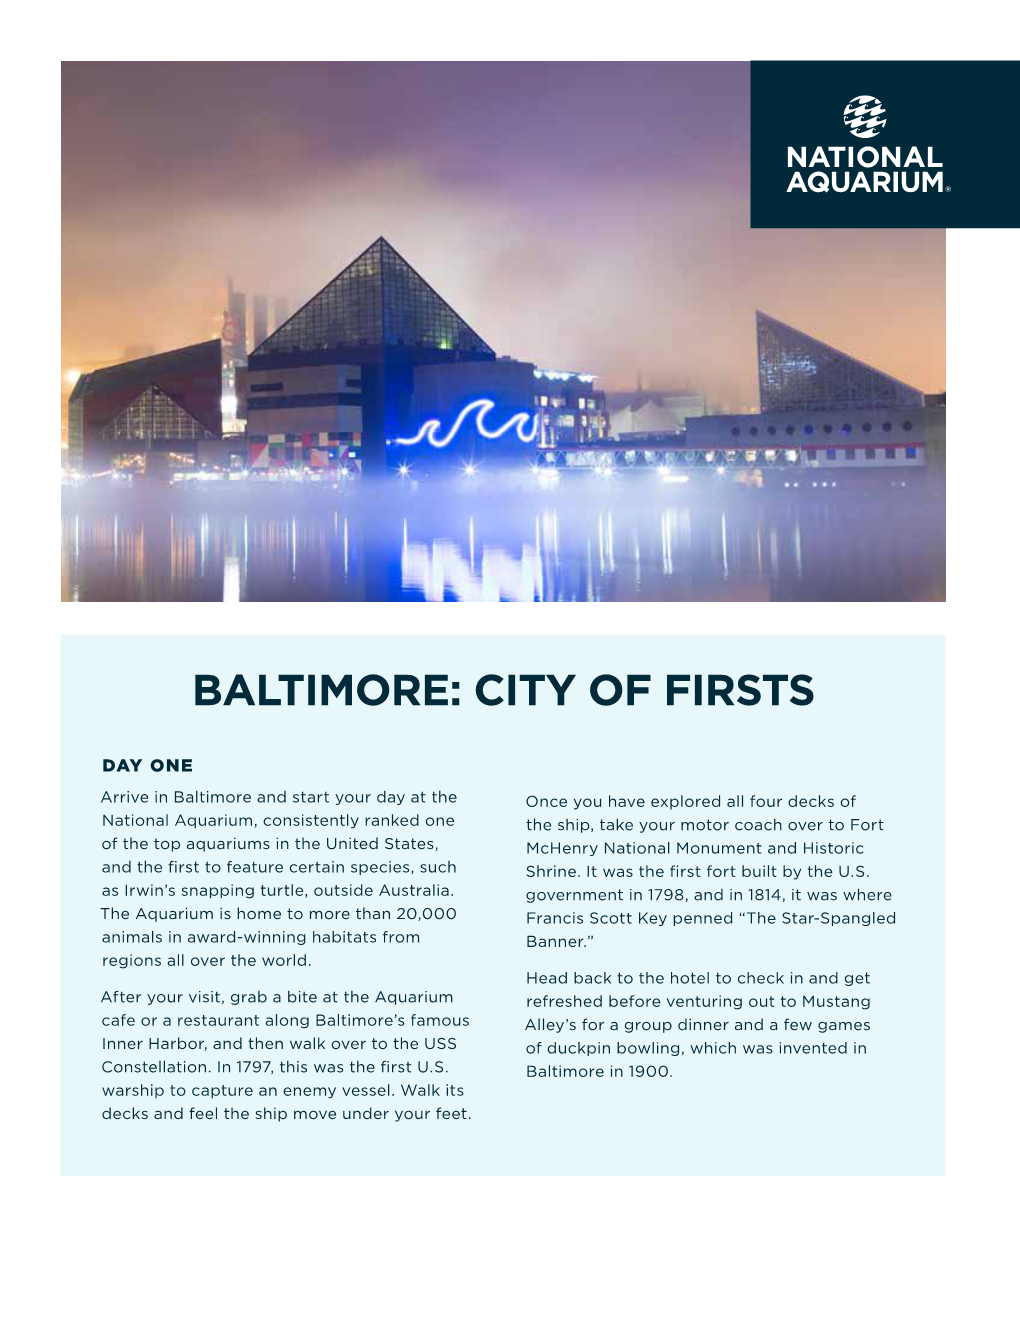 Baltimore: City of Firsts